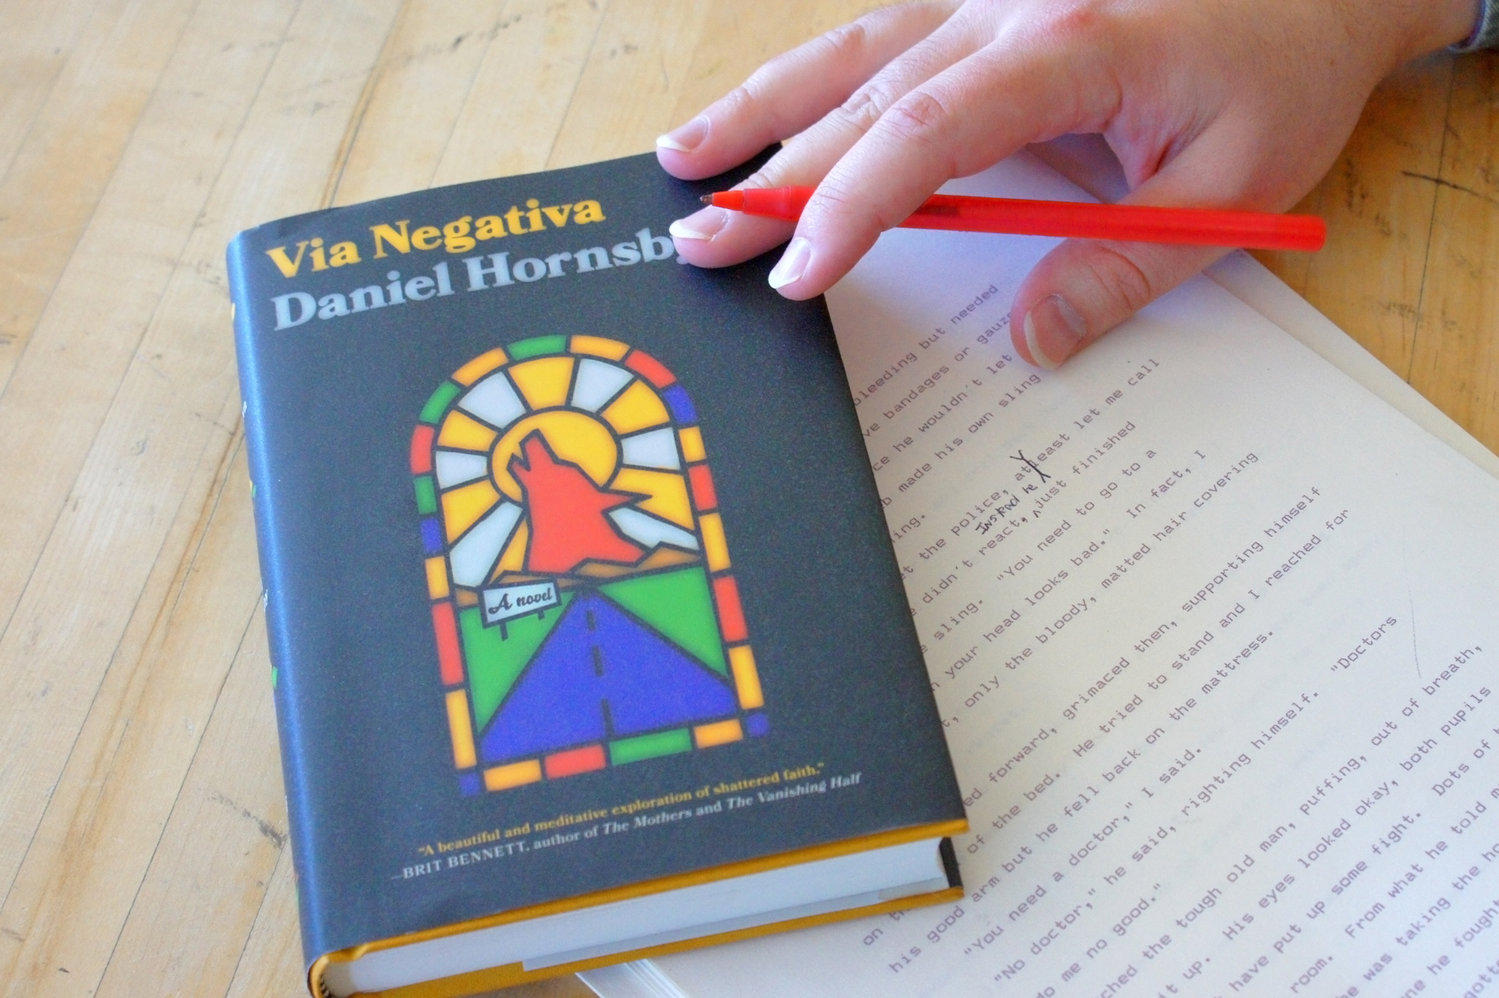 Dan Hornsby published his first book, "Via Negativa," in 2020. (Photo by Terry Faust)